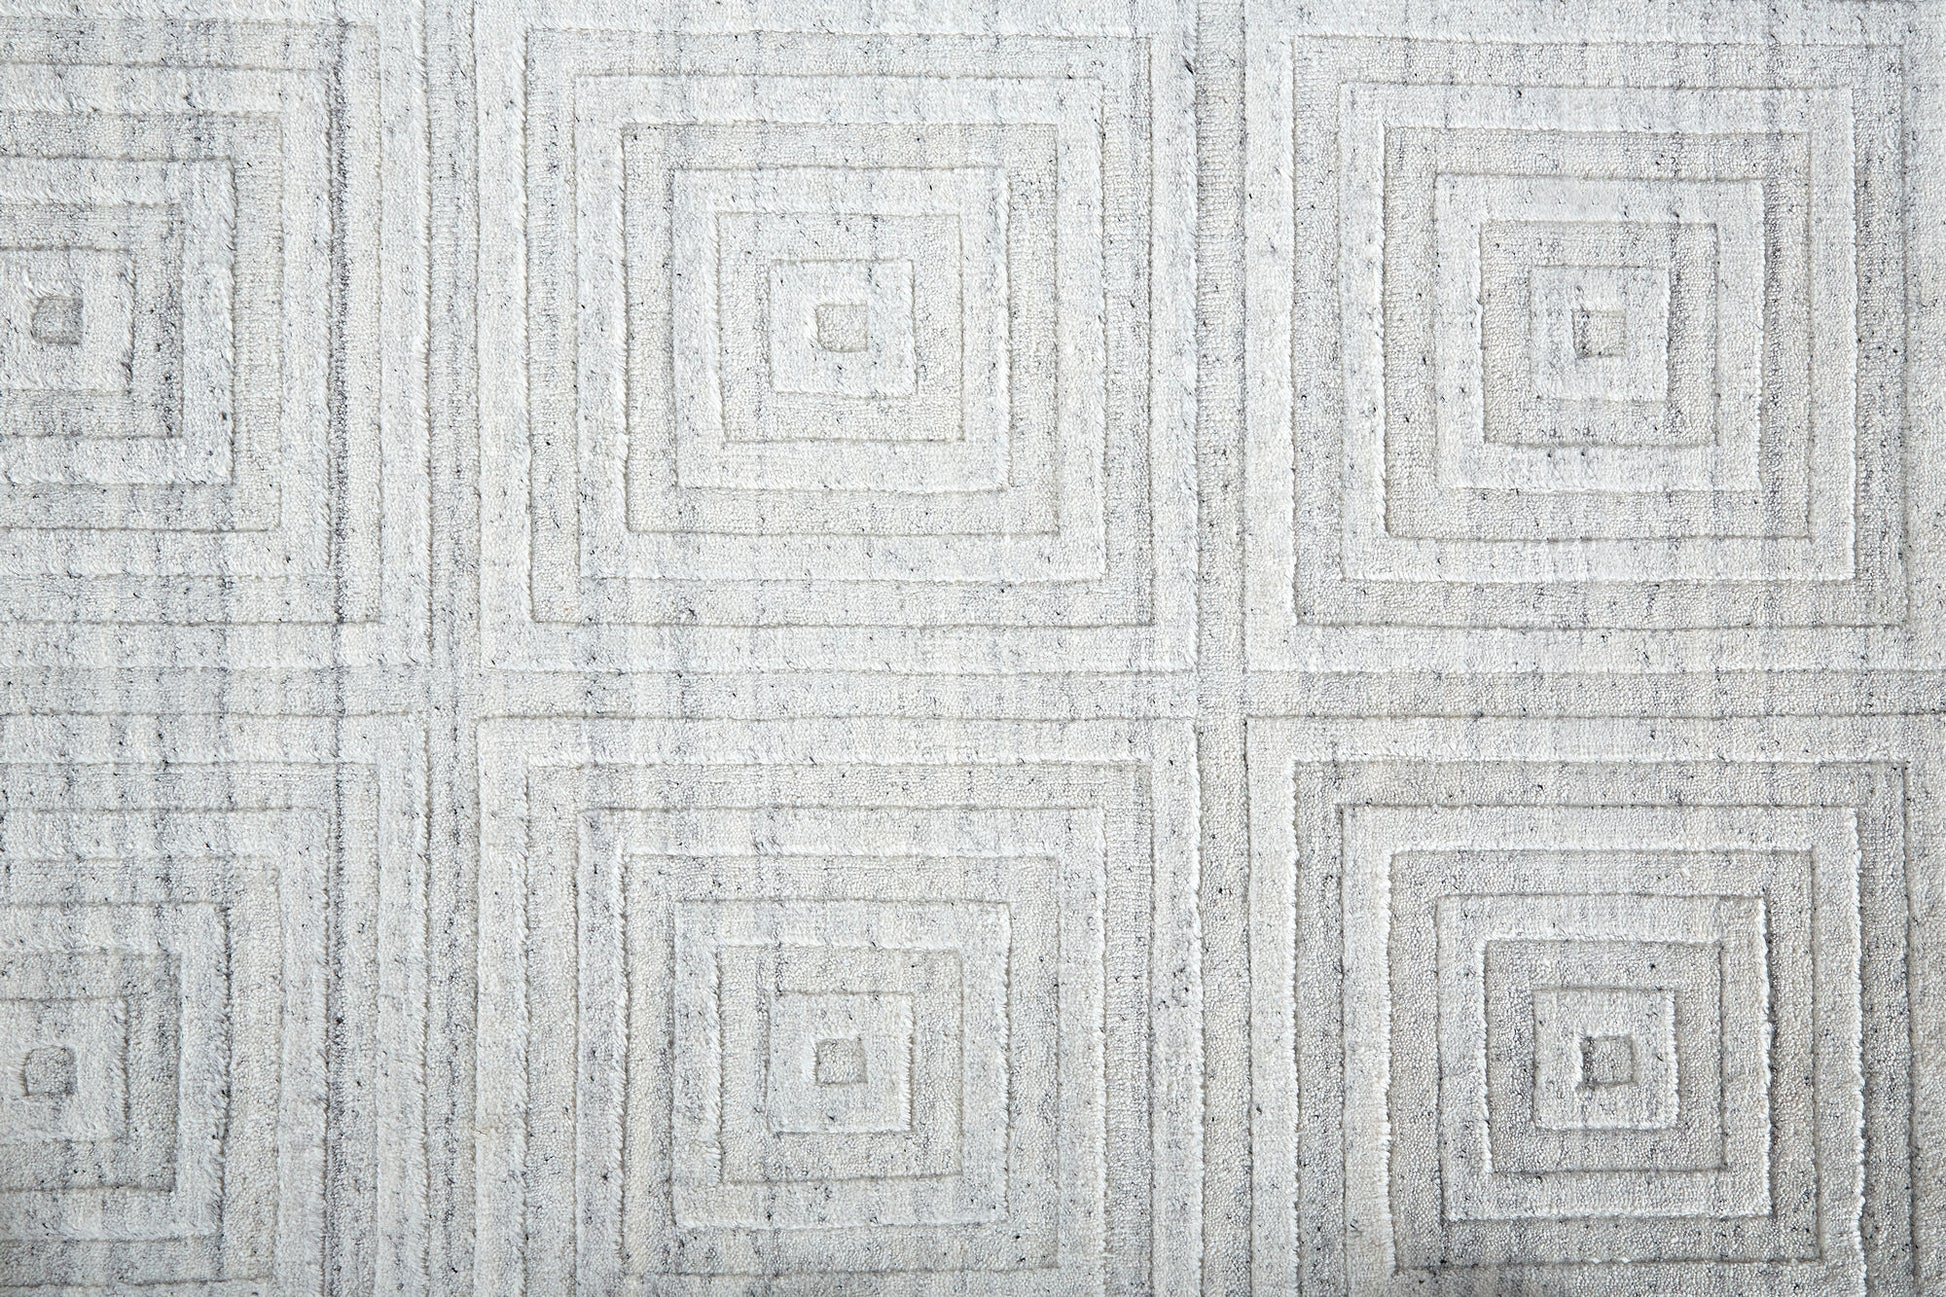 Feizy Redford 8670F White/Silver Area Rug